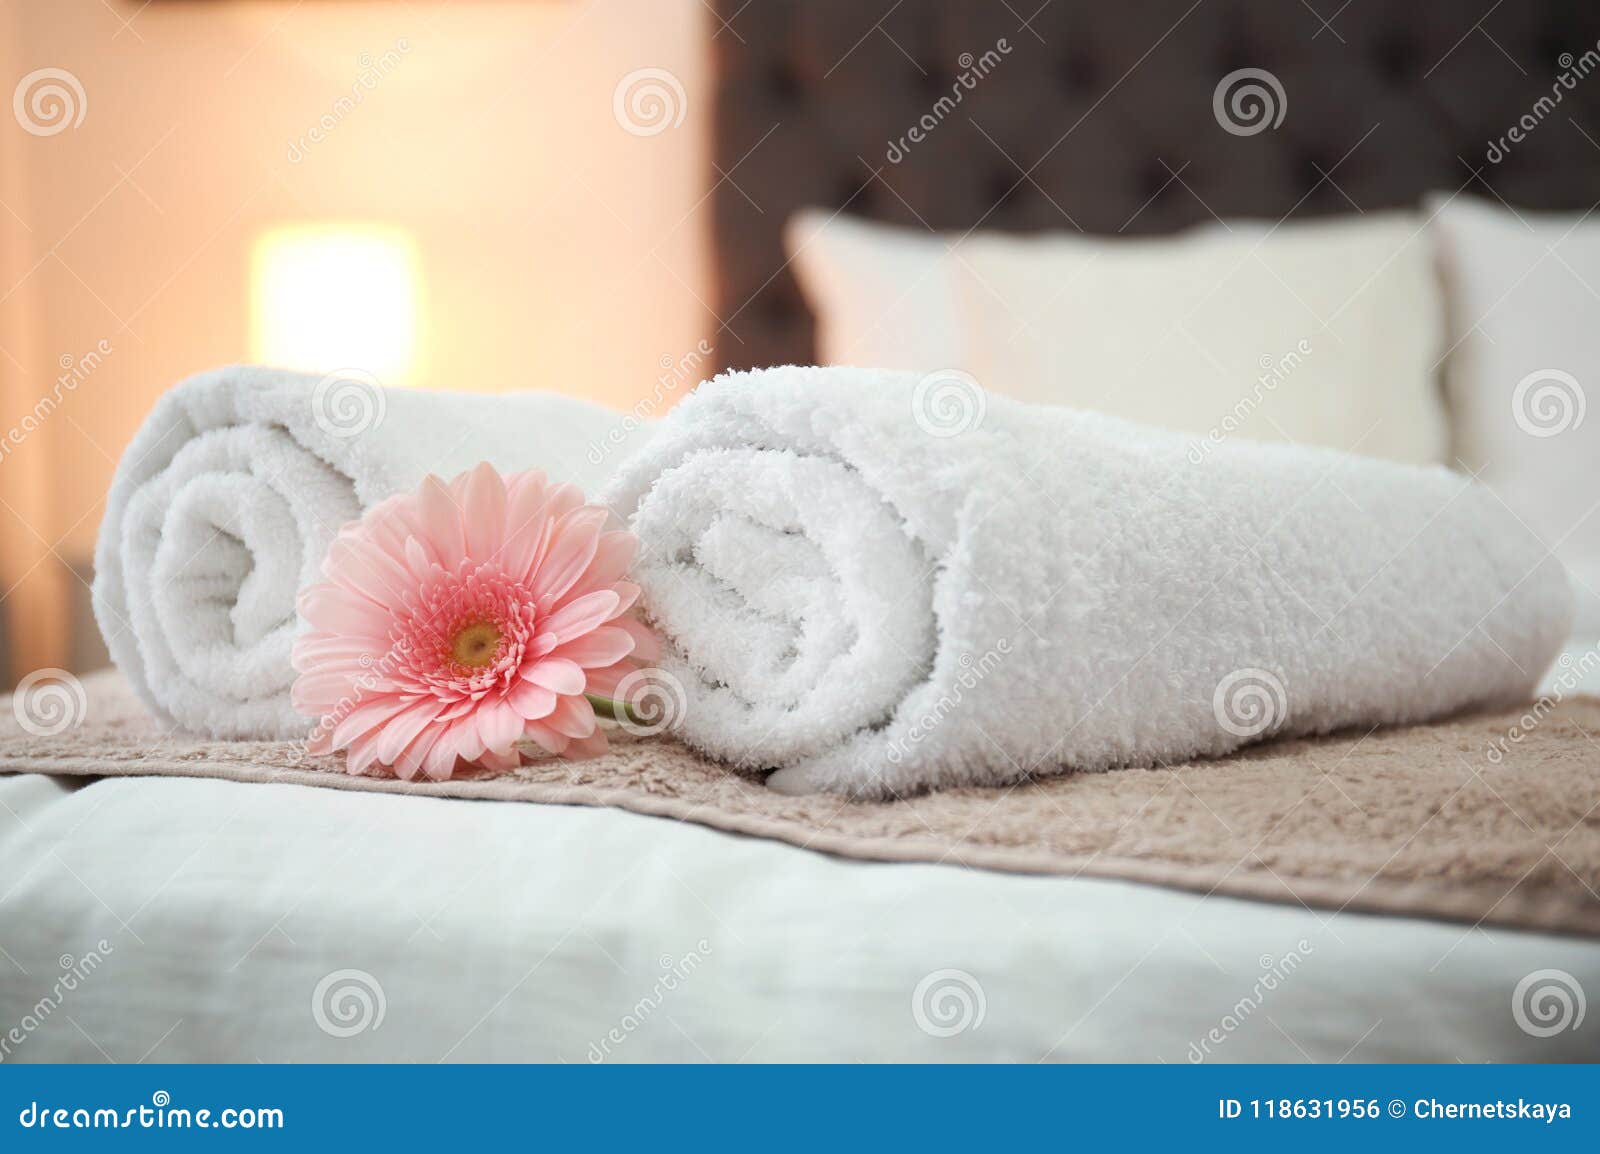 clean towels on bed